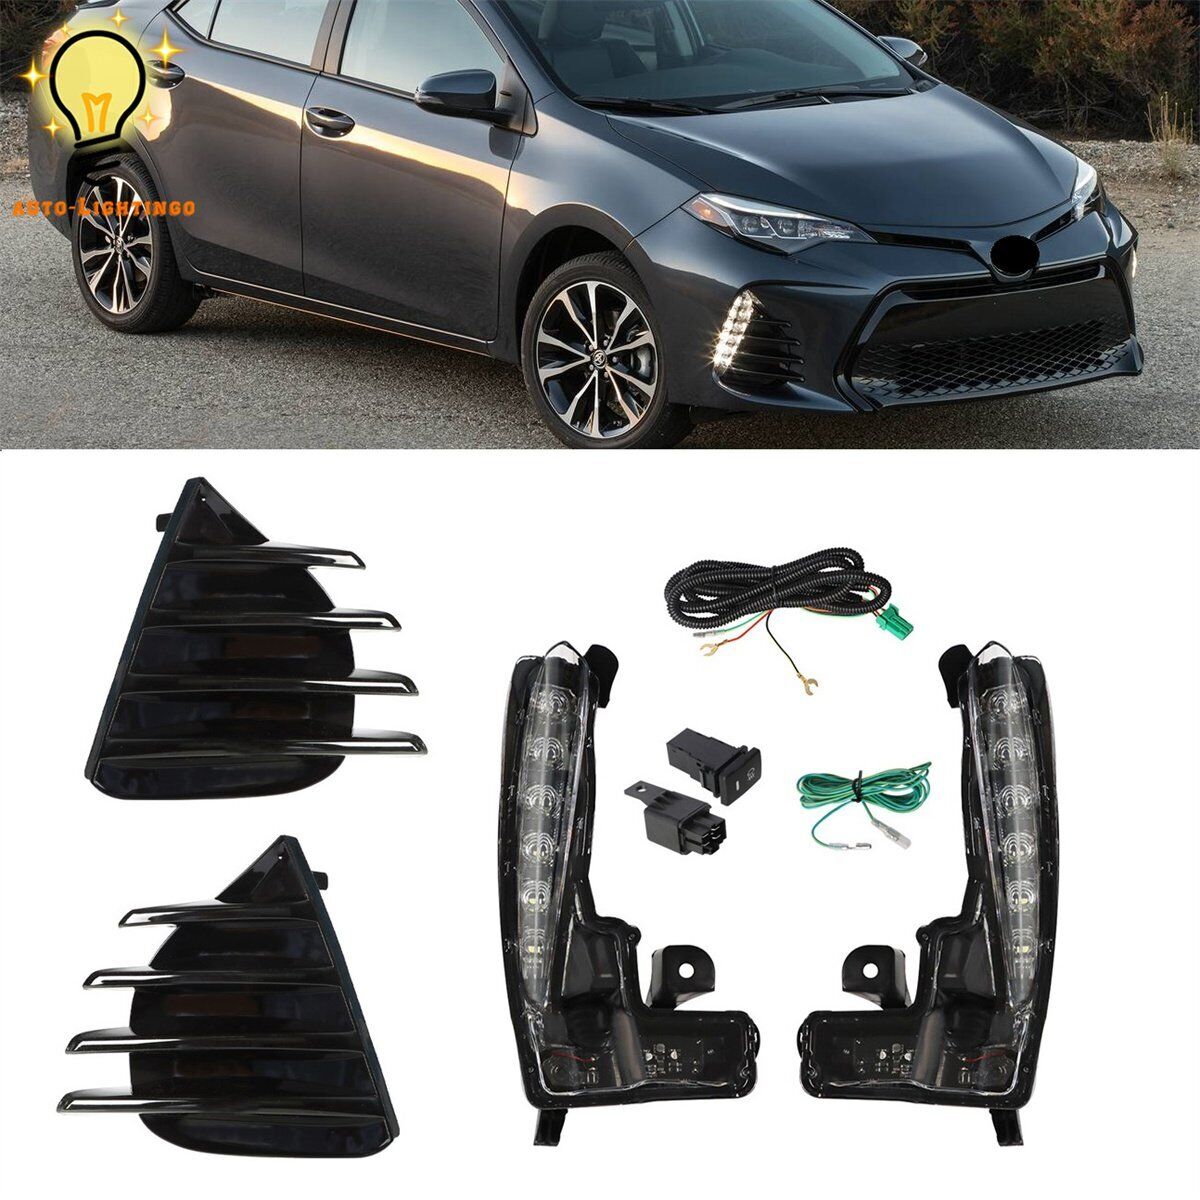 Pair of Fog Lights LED Lamps w/Cover kits For 2017-2019 Toyota Corolla SE XSE